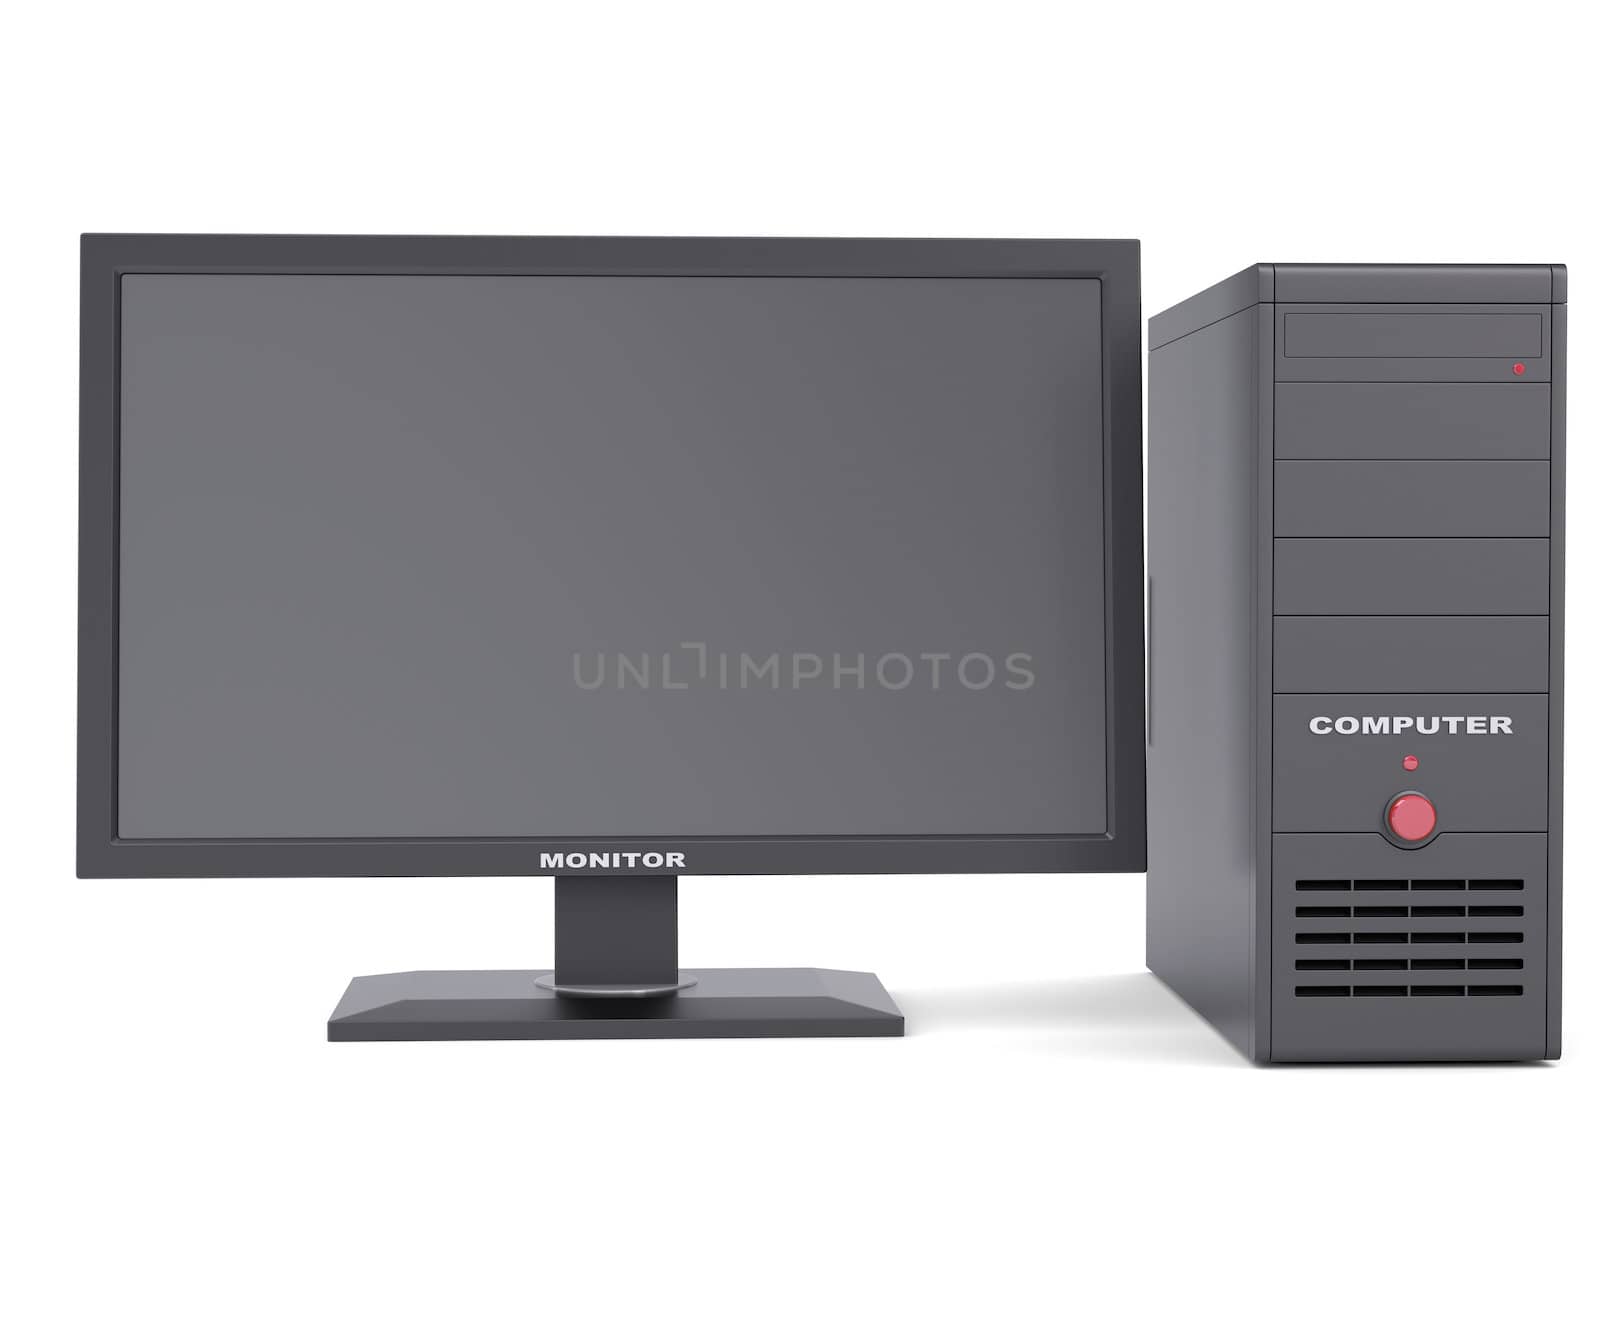 System unit with a monitor. Isolated render on a white background